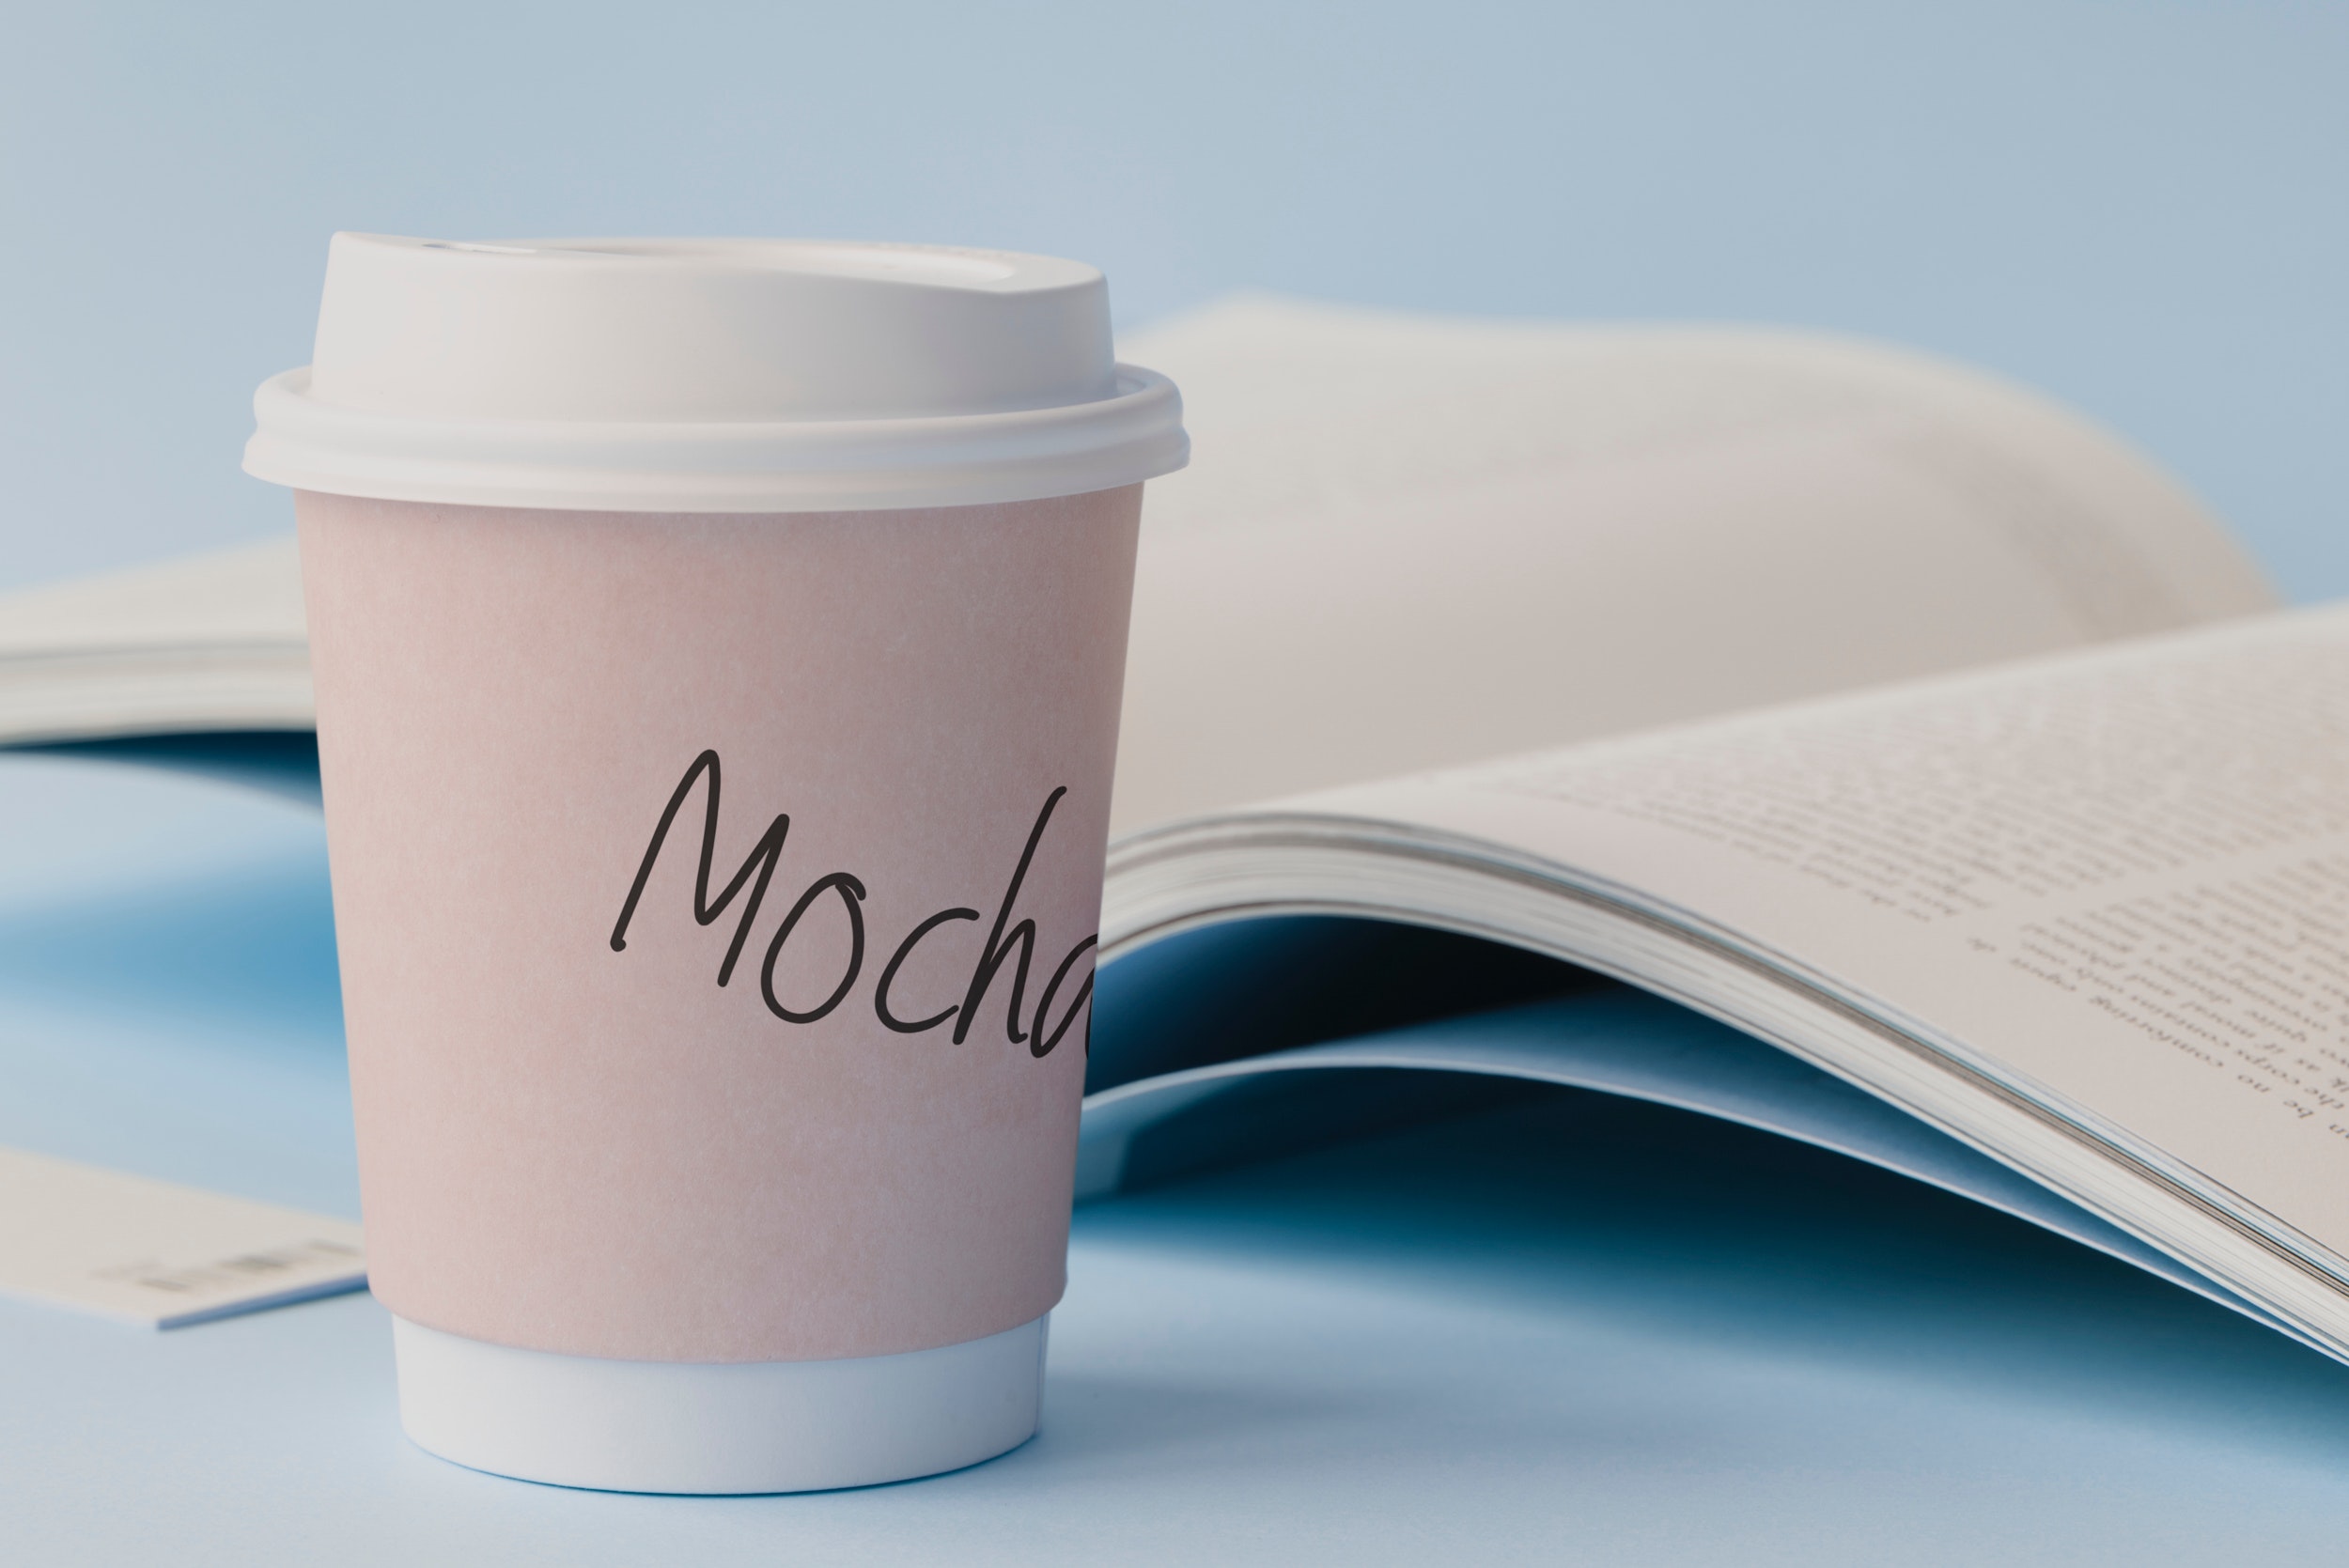 Mocha Labeled White Disposable Coffee Cup Beside Book, Beverage, Hot drink, Plastic, Papers, HQ Photo